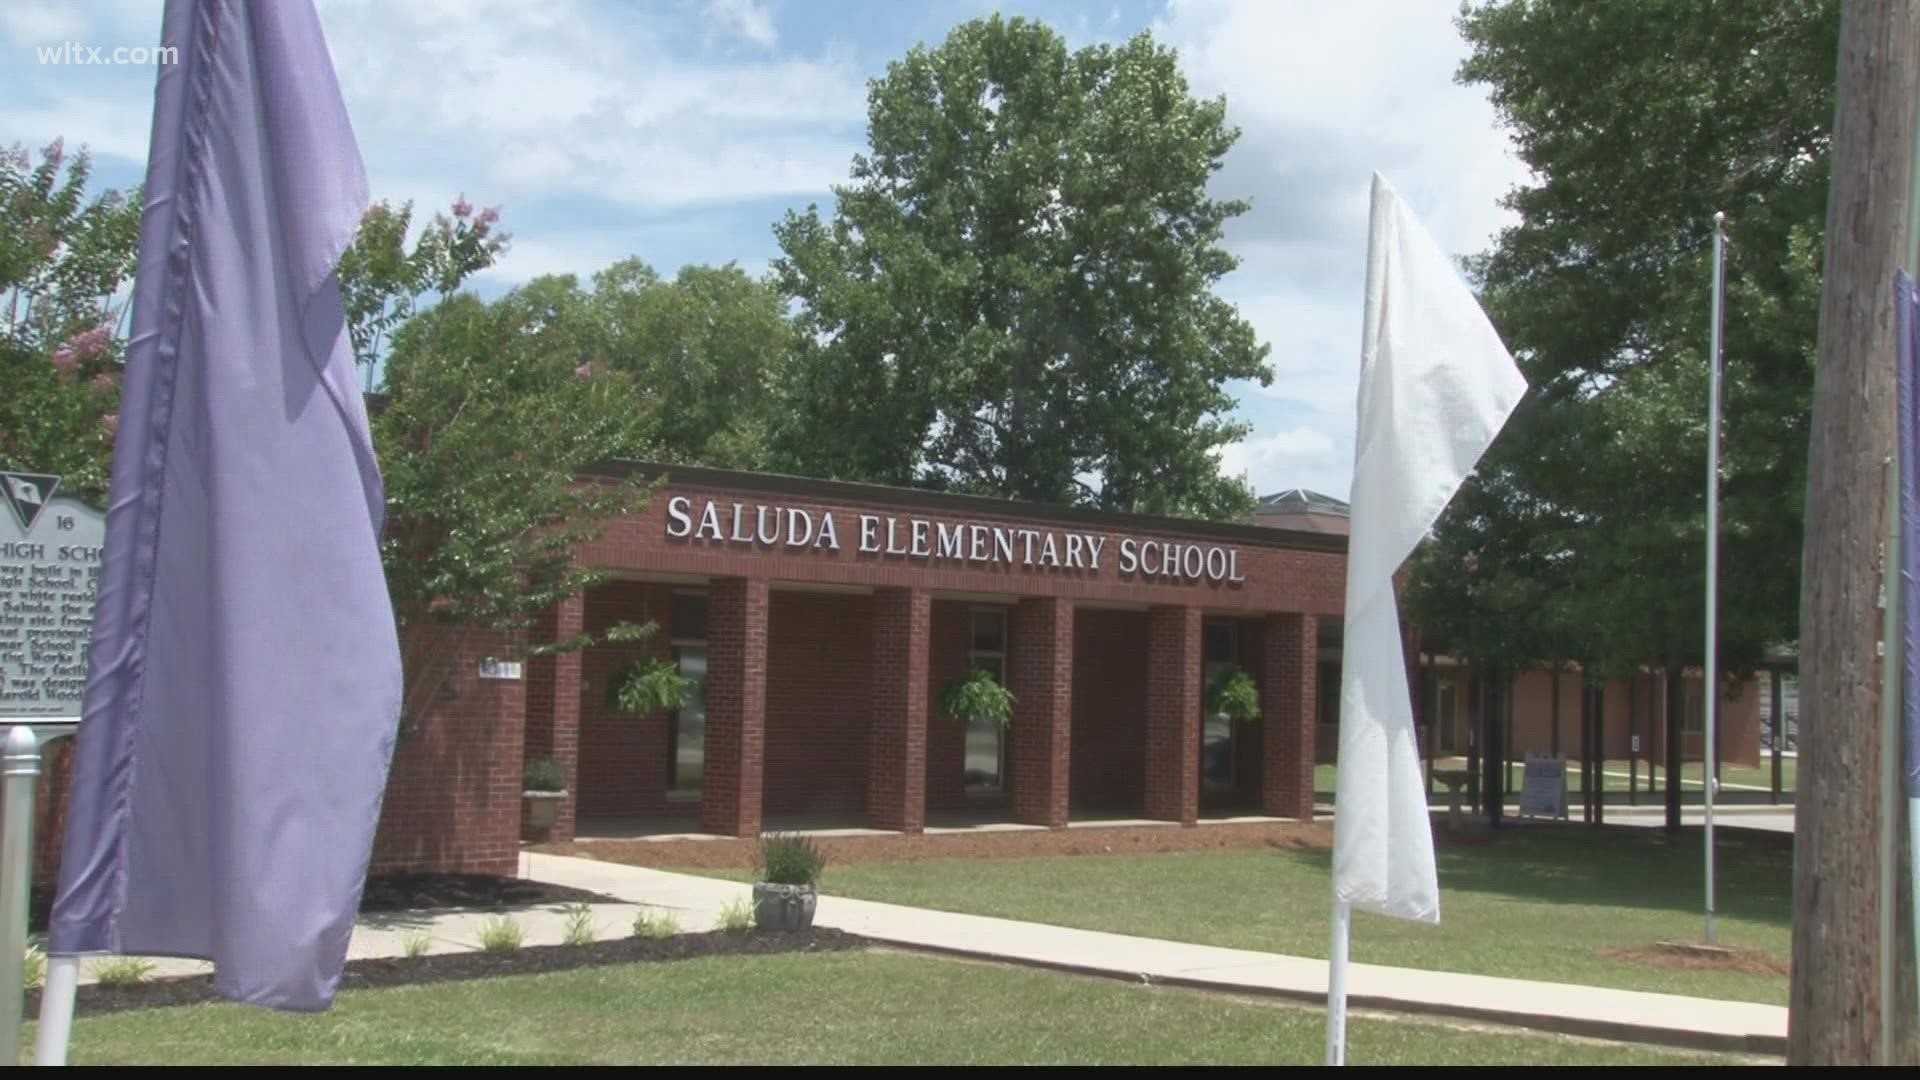 The school district plans to build a new elementary school.